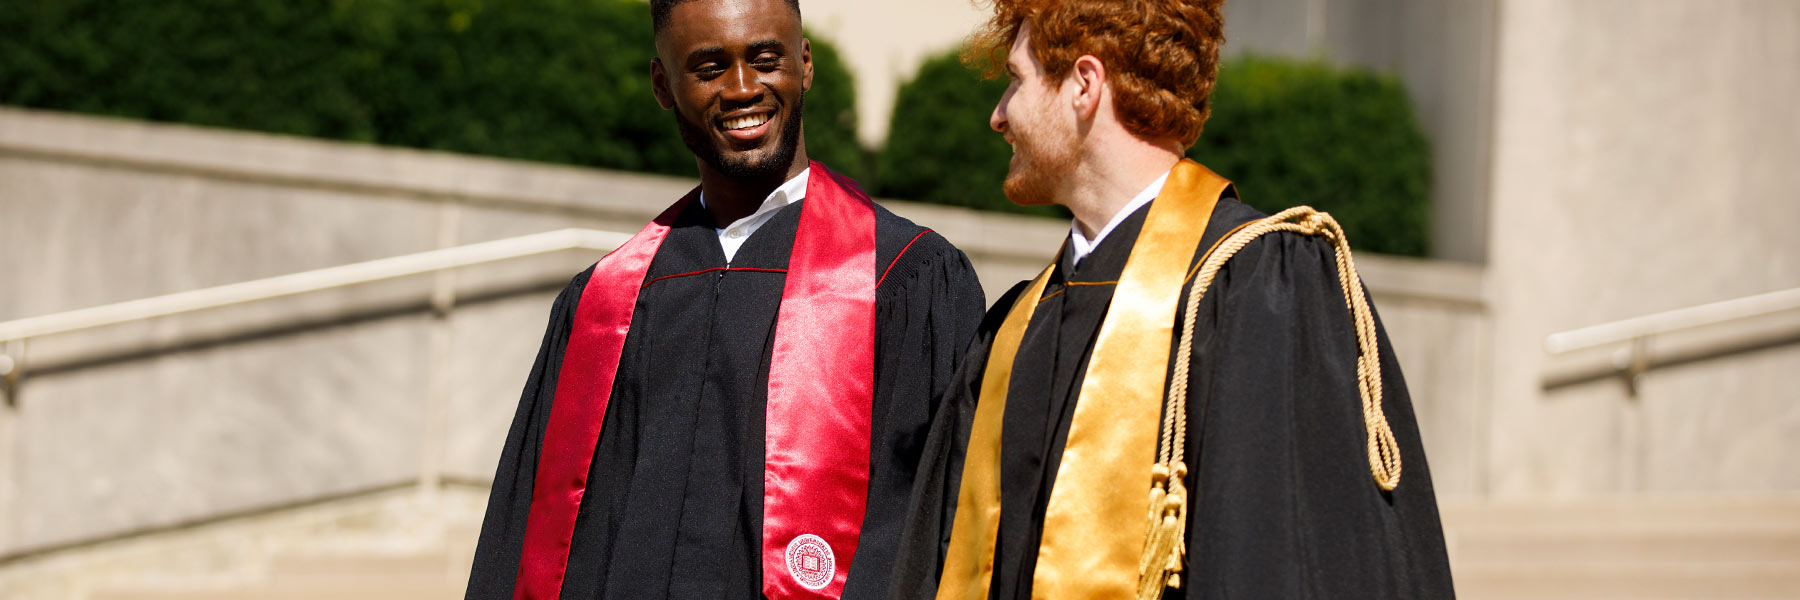 Two male graduates stand on outdoor steps; one is wearing an IU stole and the other is wearing a Purdue stole with honor cords.